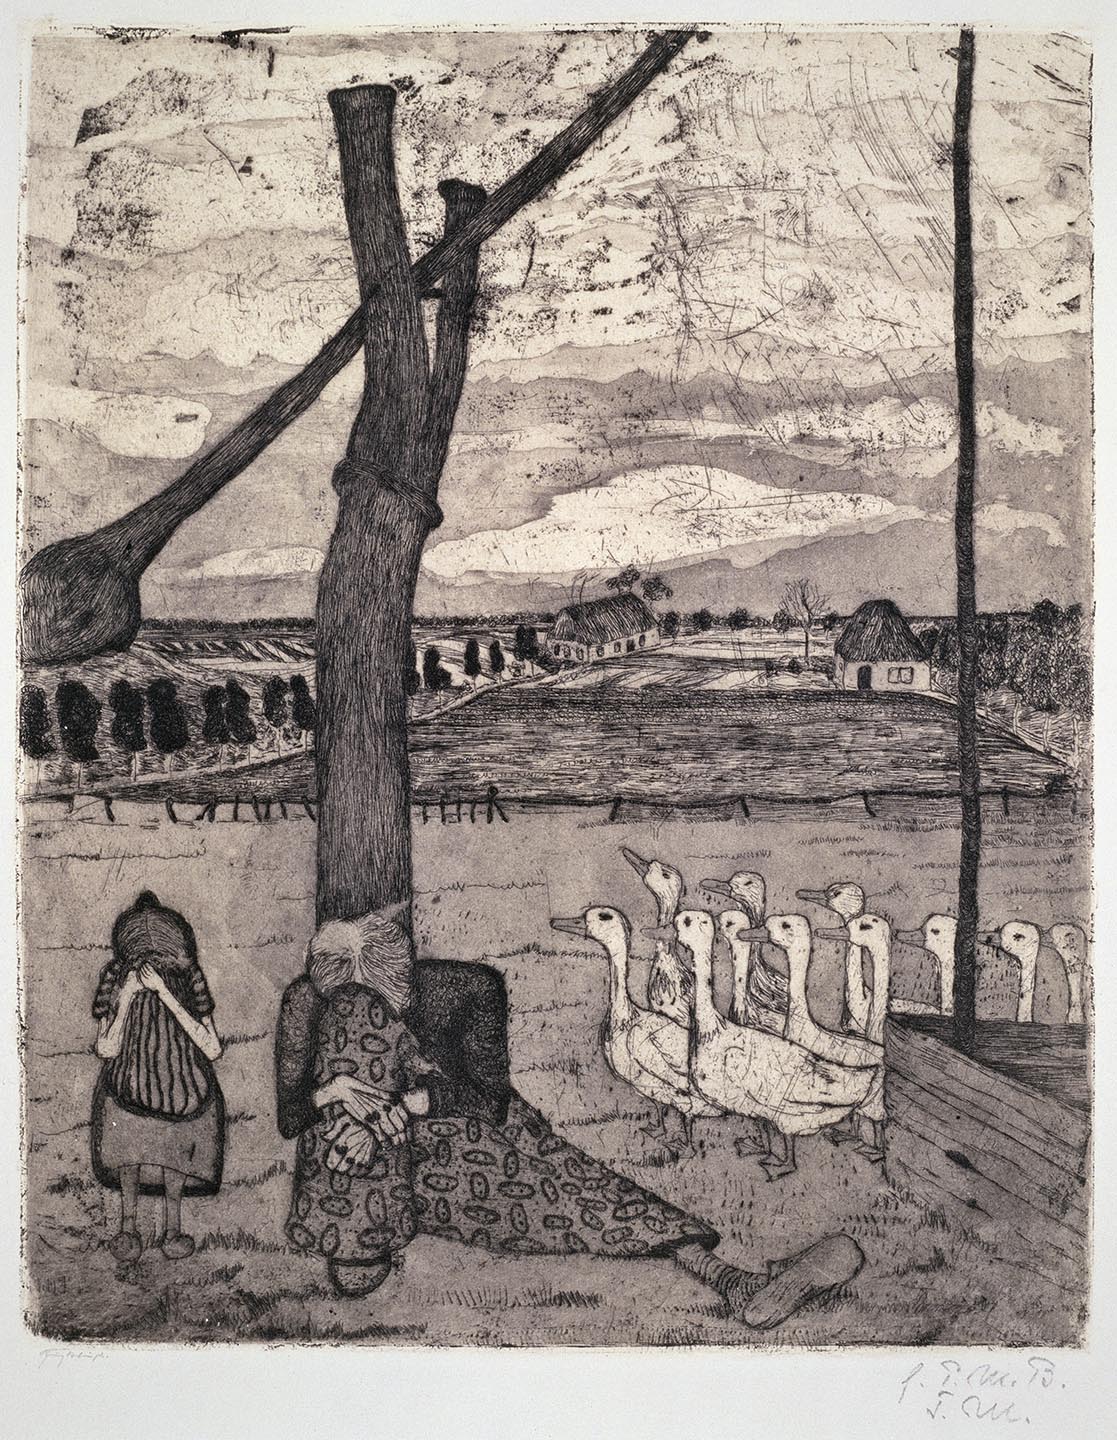 The picture shows a tree under which two women can be seen. The women sit under the tree and keep their heads pressed against their knees so that their faces cannot be seen. On the right part of the picture a flock of geese is coming towards them. The geese represent the only white element in the picture, while the rest of the picture is drawn in grayish and black tones. The picture is part of the touring exhibition "Paula Modersohn-Becker and the Worpsweder. Drawings and Prints. 1895–1906”, which takes place in Bucharest from 27 October 2023 to 14 January 2024.